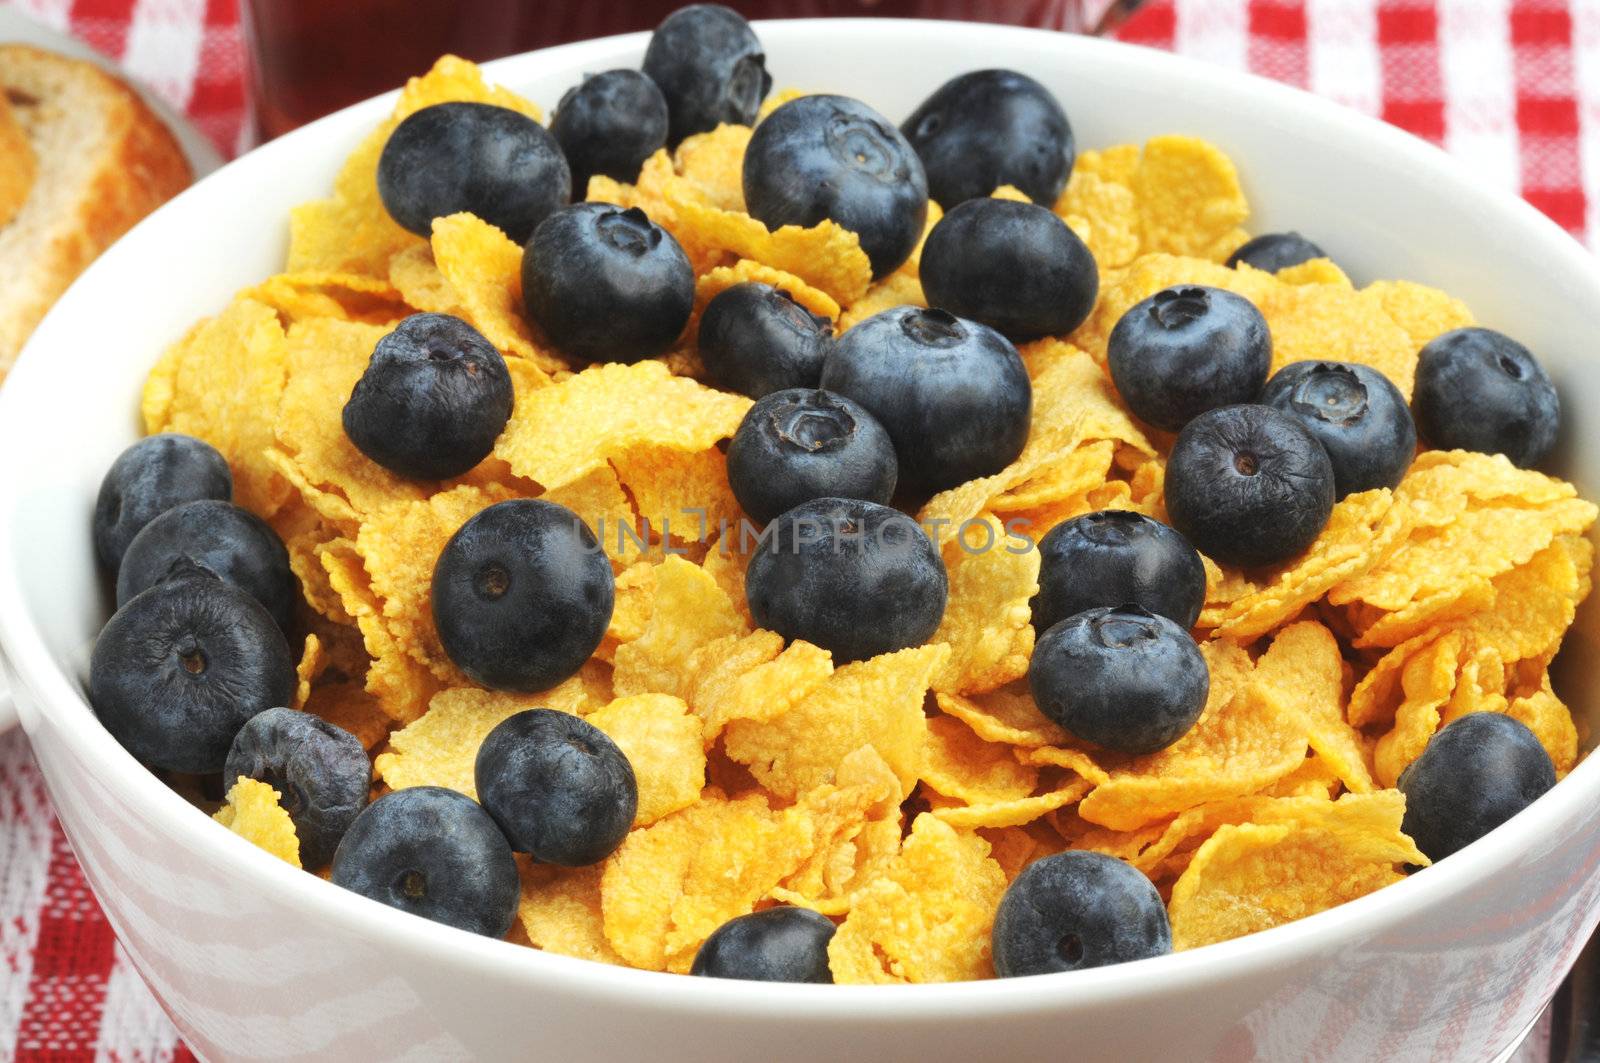 Bowl of ripe blueberries served on corn flakes.